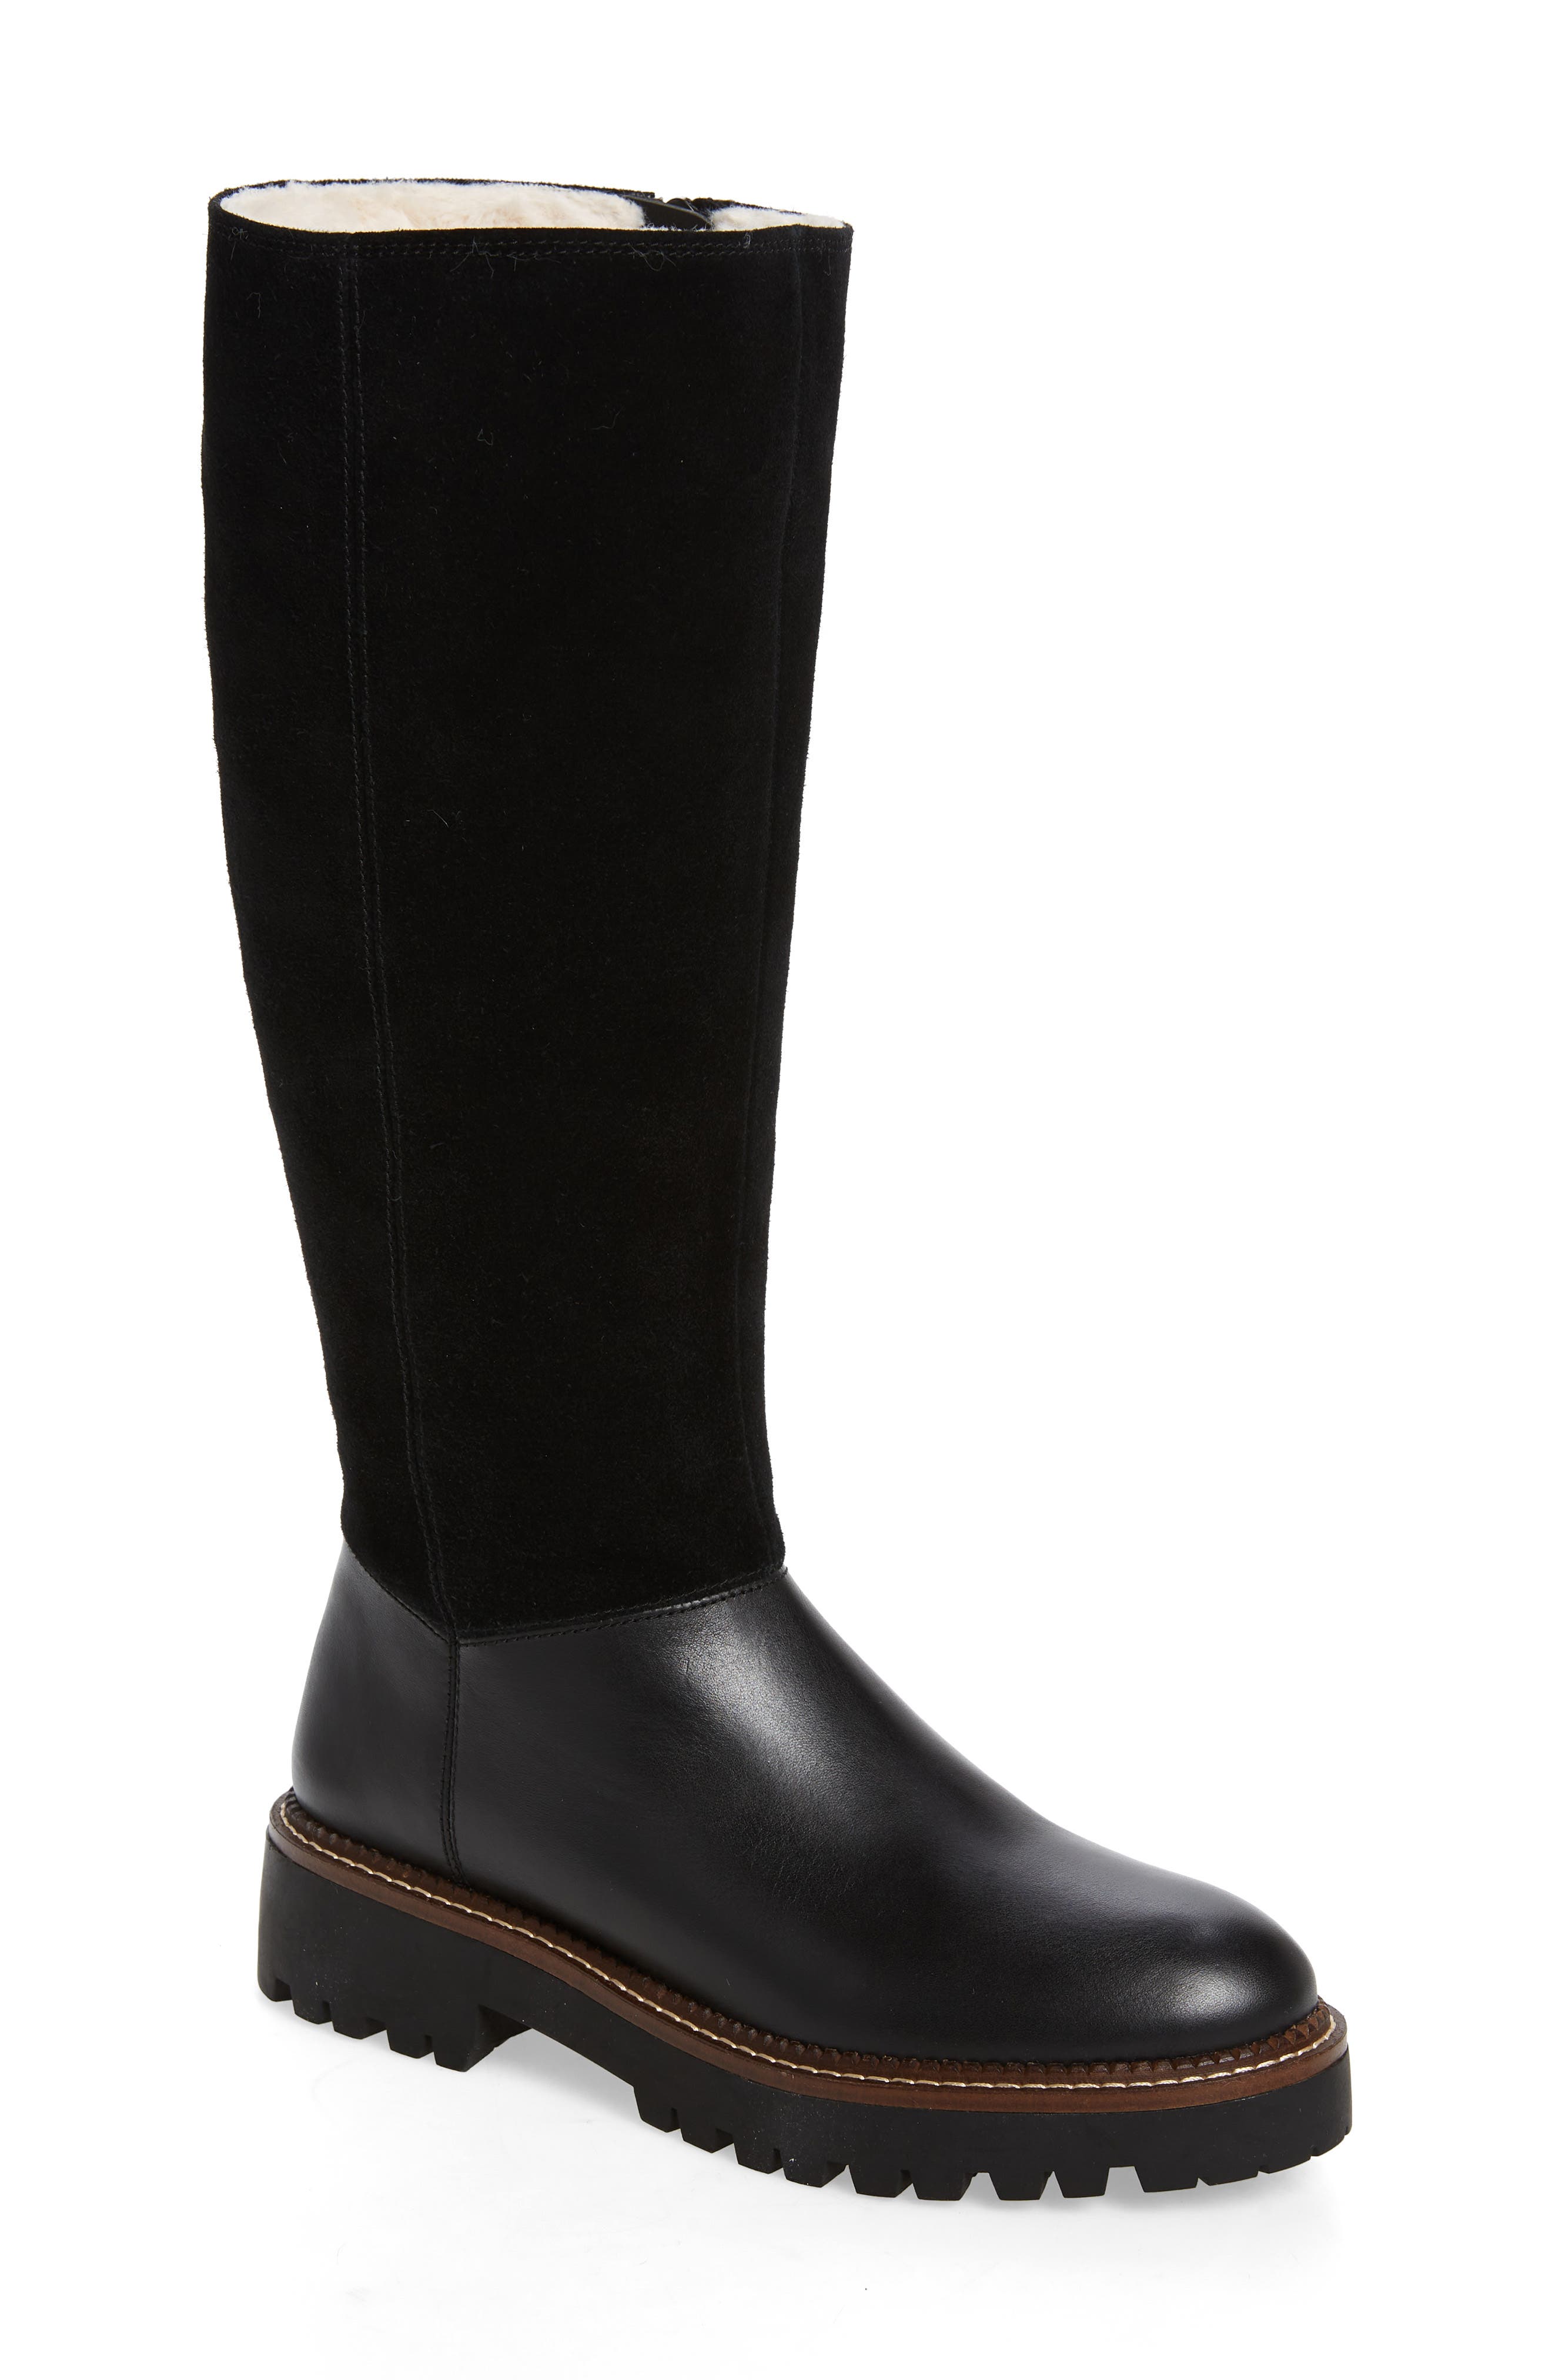 Caslon(R) Mimmo Water Resistant Boot